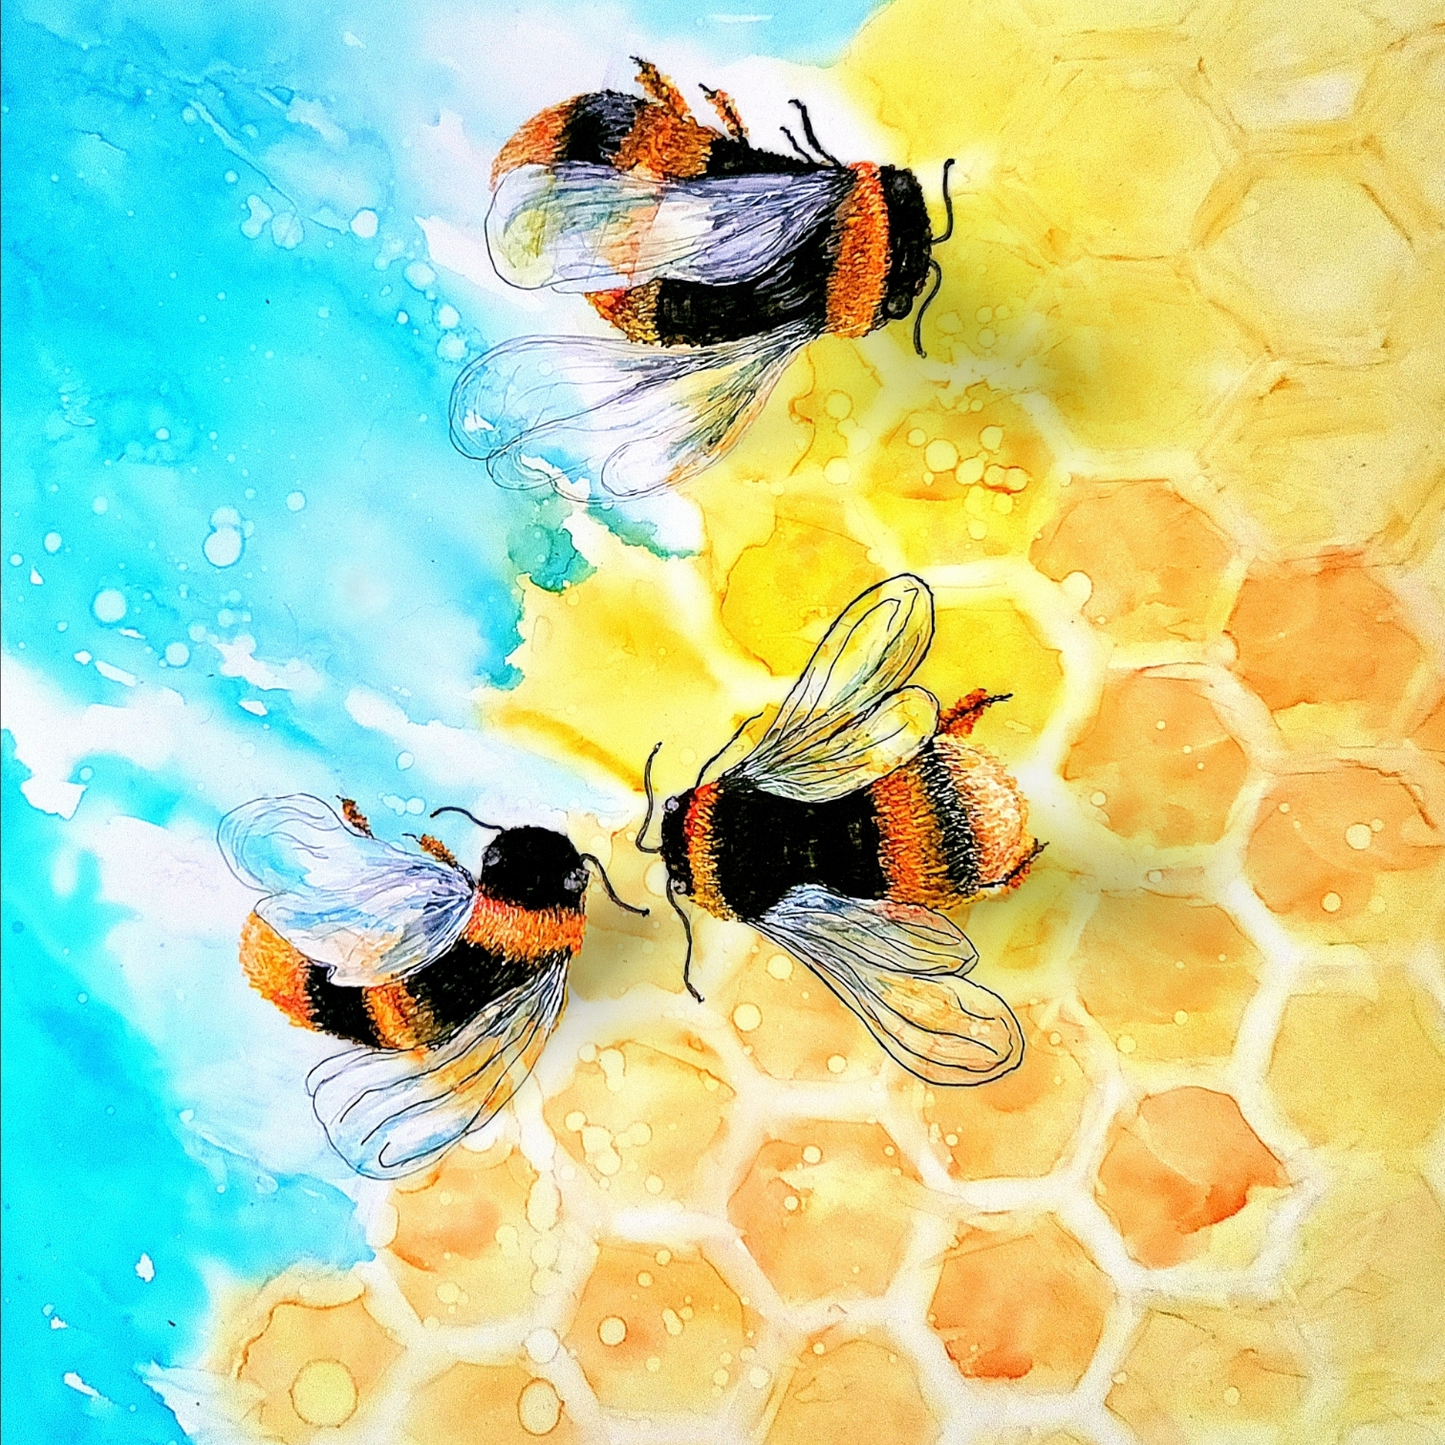 Bee-lieve Alcohol Ink Limited Edition Giclee Print by The Artful Lynk, Lynda Krupa Original Alcohol Ink Art